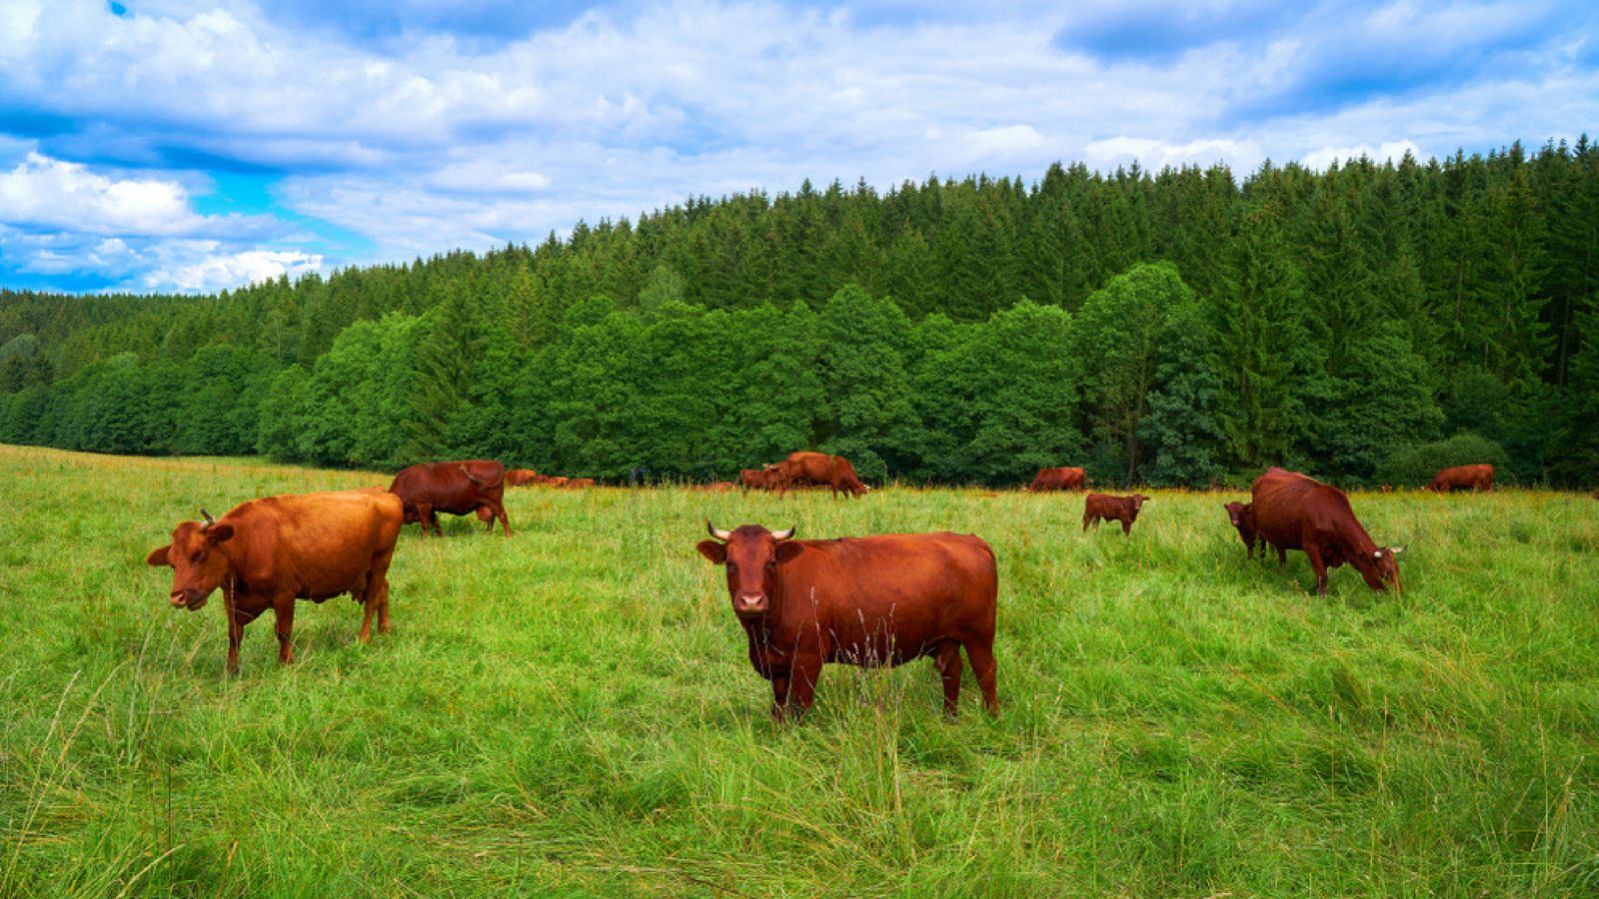 Brown cow cattle in Harz forest of Germany. Photo via shutterstock.com